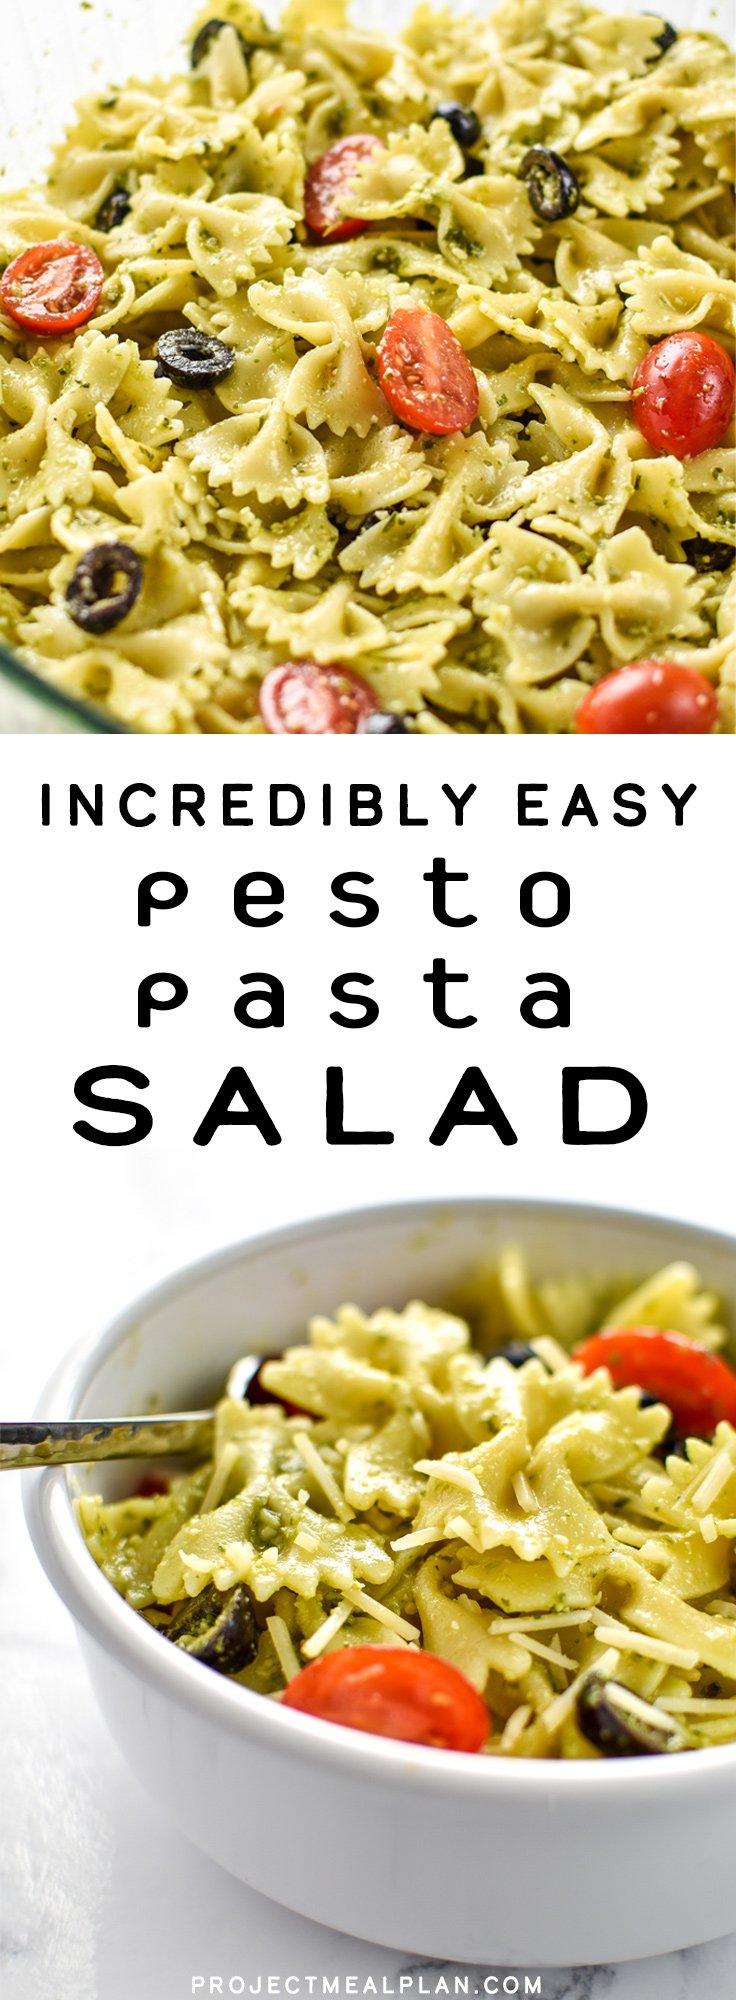 Incredibly Easy Pesto Pasta Salad - just 6 simple ingredients for the best make-ahead side dish! - ProjectMealPlan.com